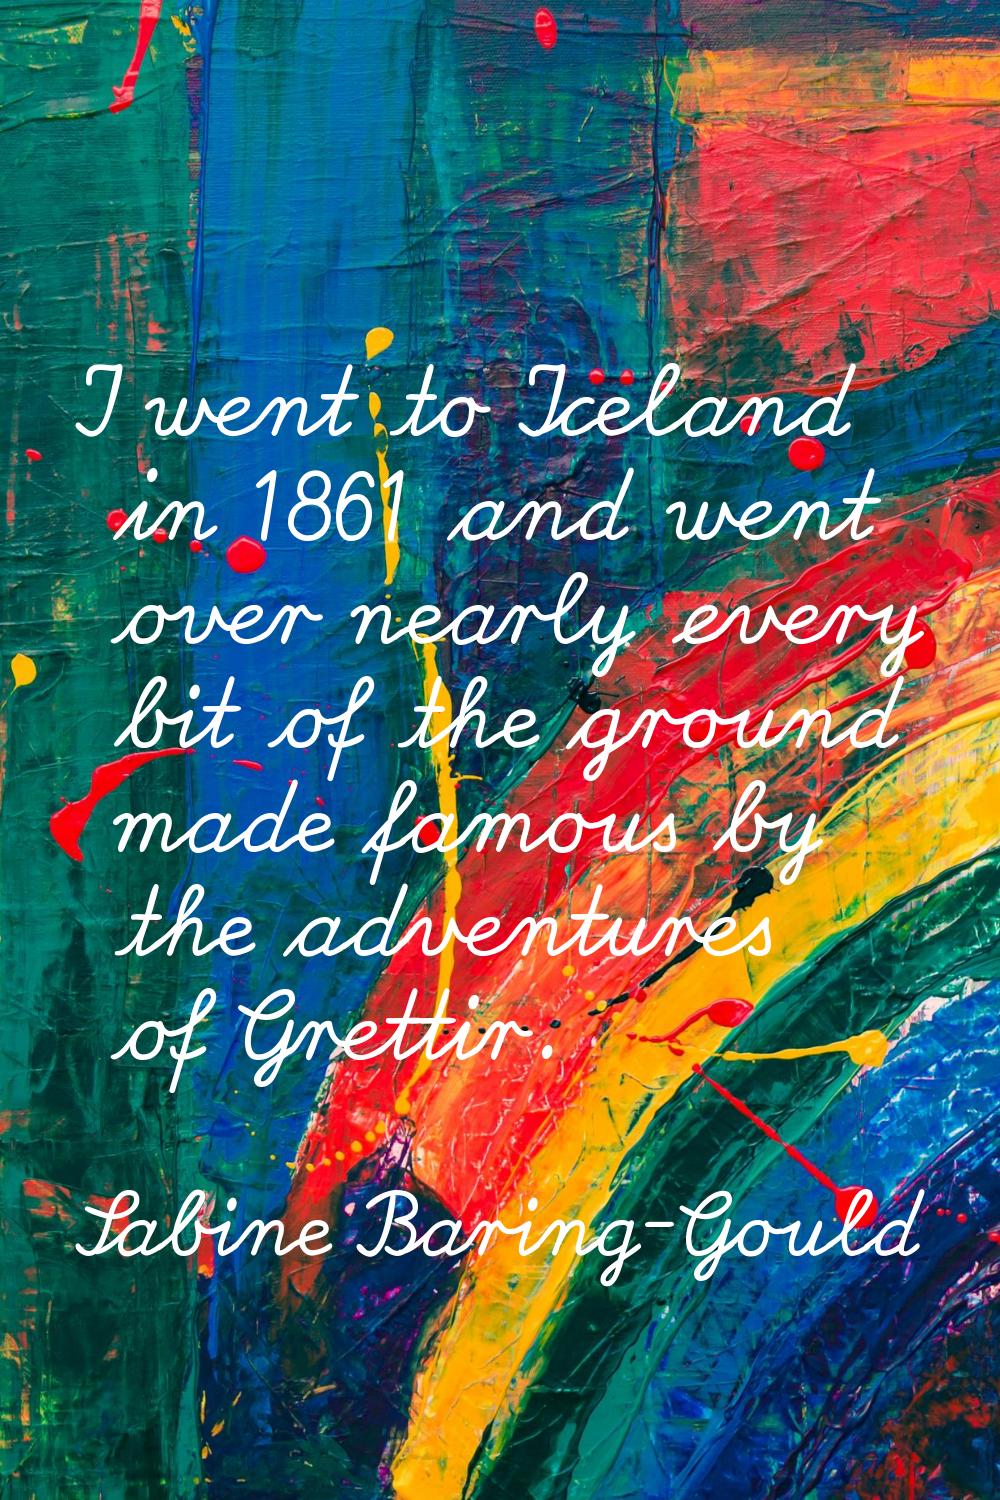 I went to Iceland in 1861 and went over nearly every bit of the ground made famous by the adventure